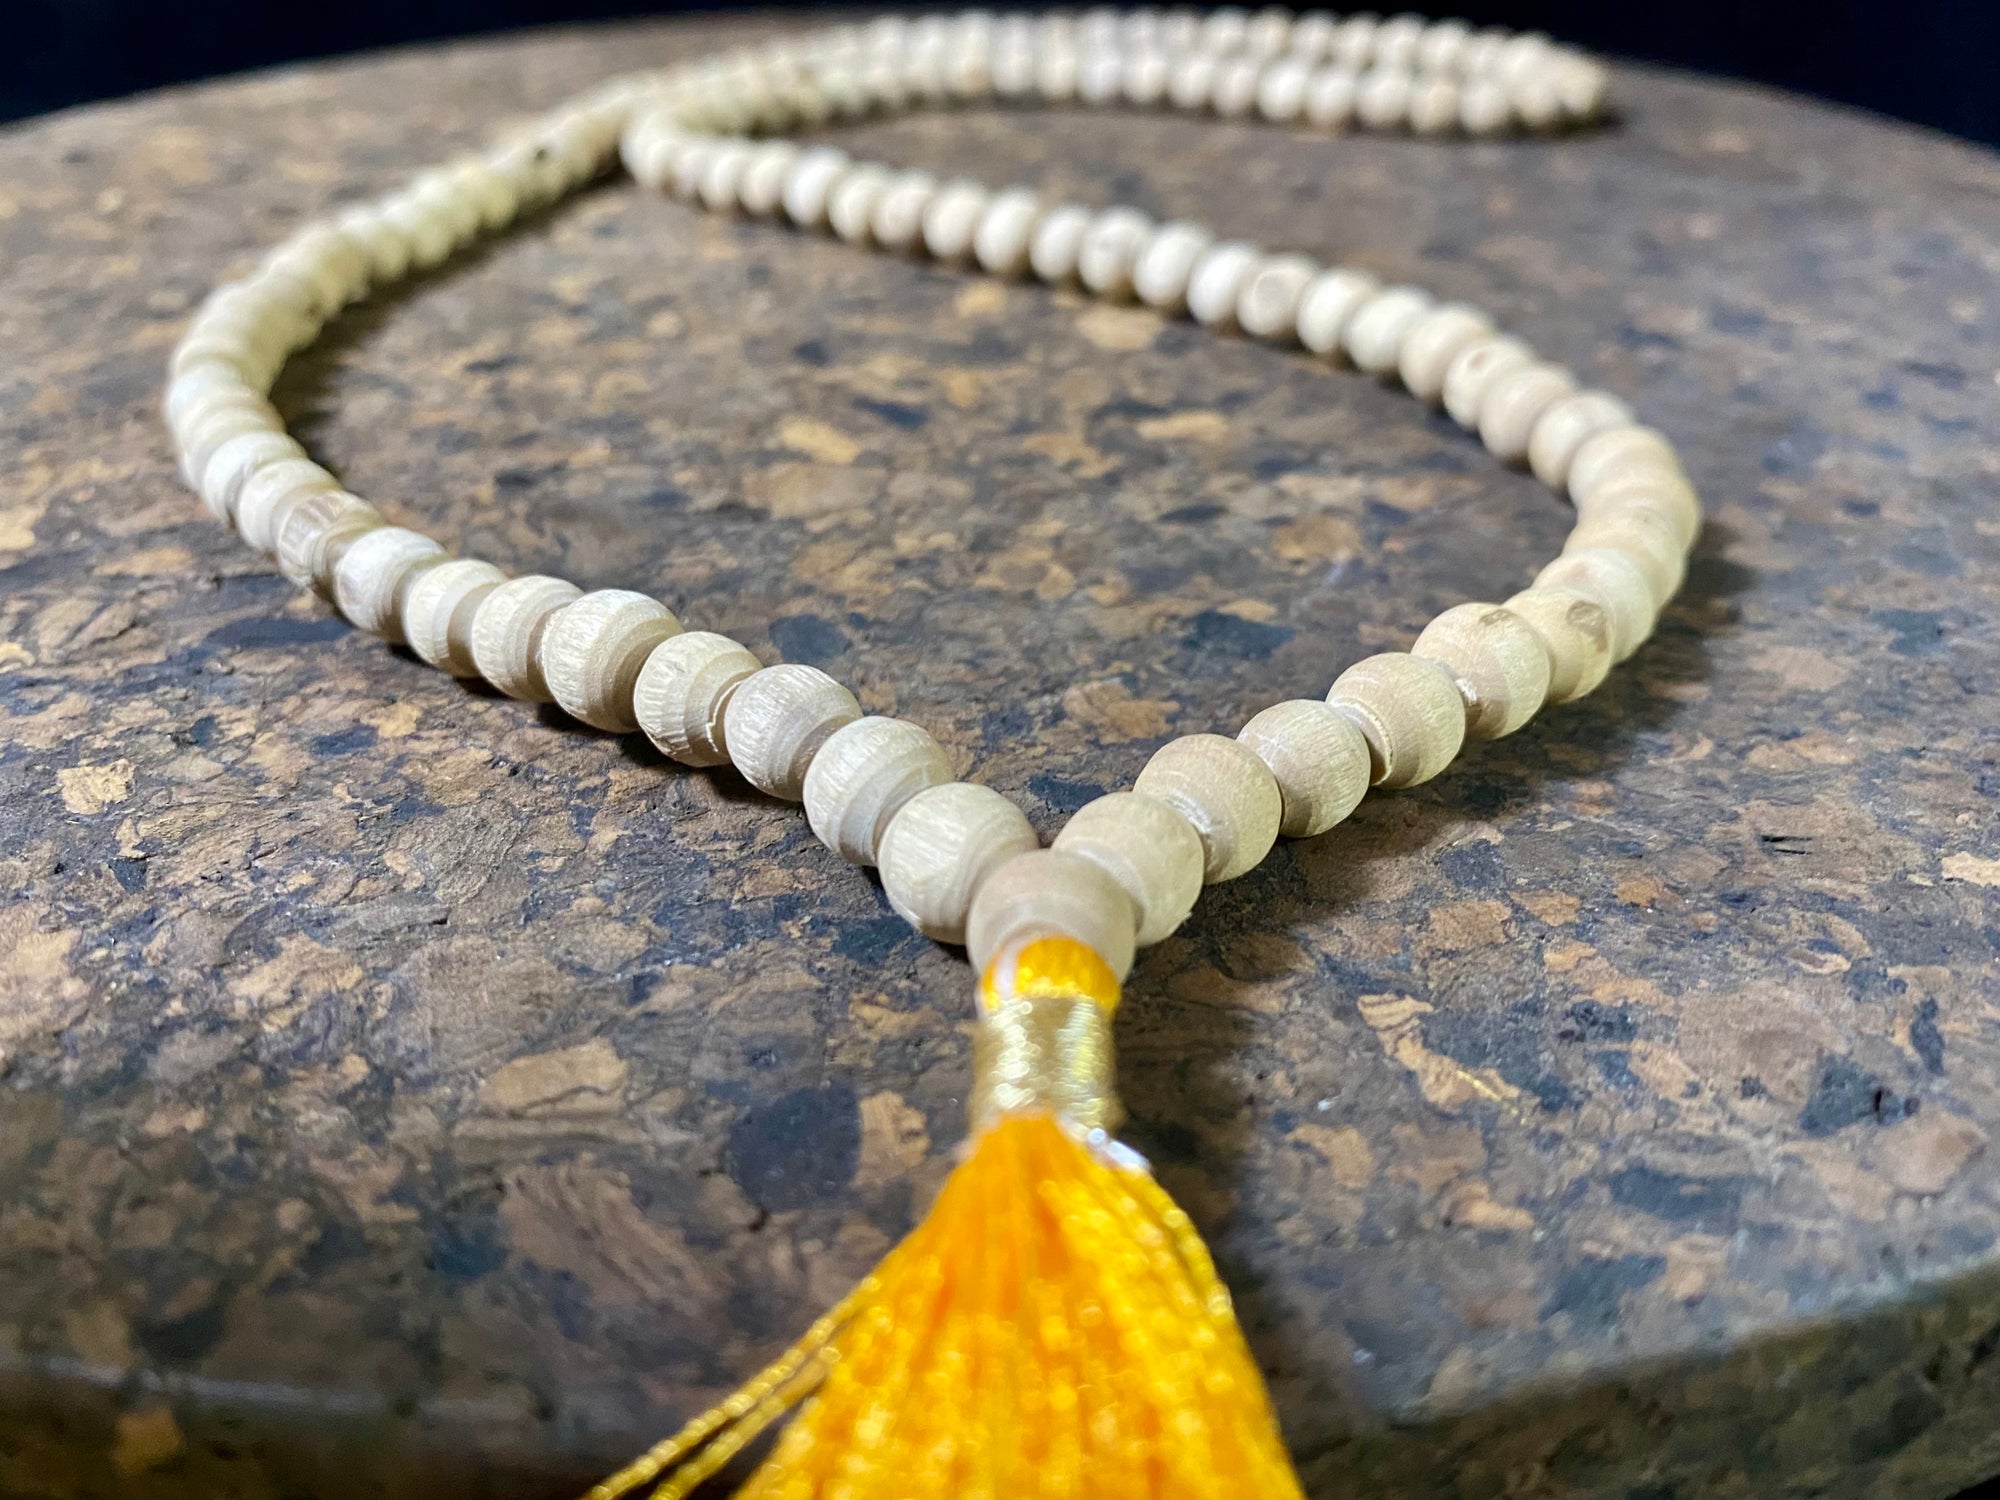 Women or men’s mala necklace, made from natural tulsi wood. As per a standard Buddhist mala, it contains 108 beads. From India